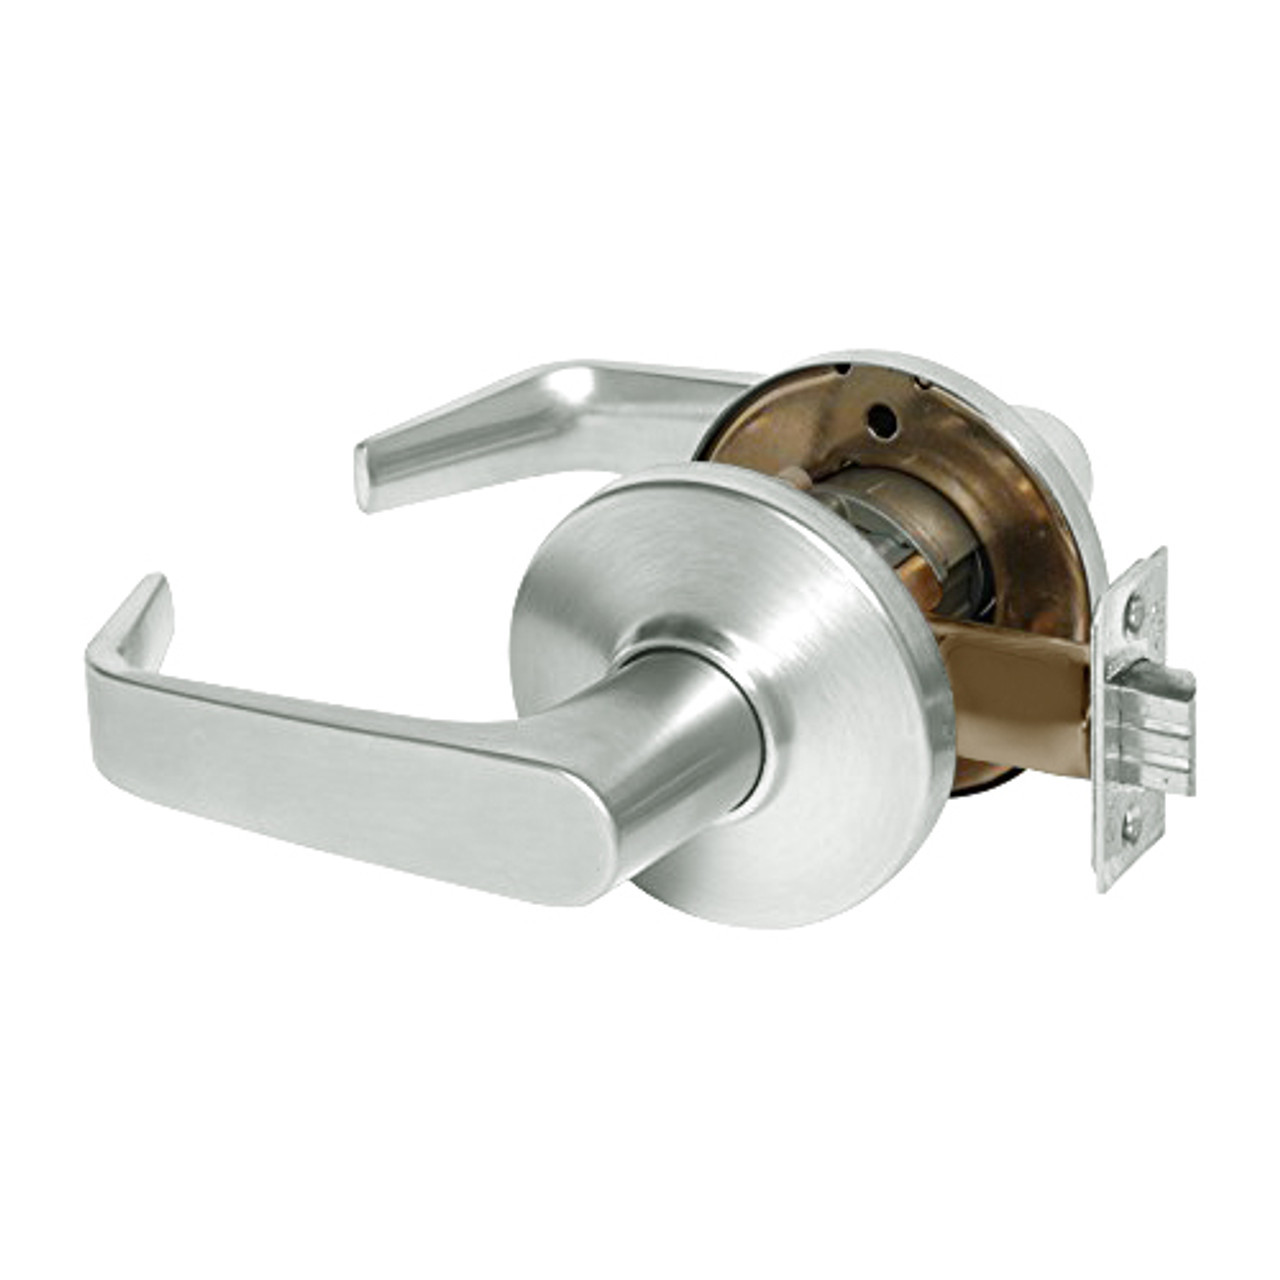 9K30NX15DSTK618LM Best 9K Series Passage Heavy Duty Cylindrical Lever Locks with Contour Angle with Return Lever Design in Bright Nickel